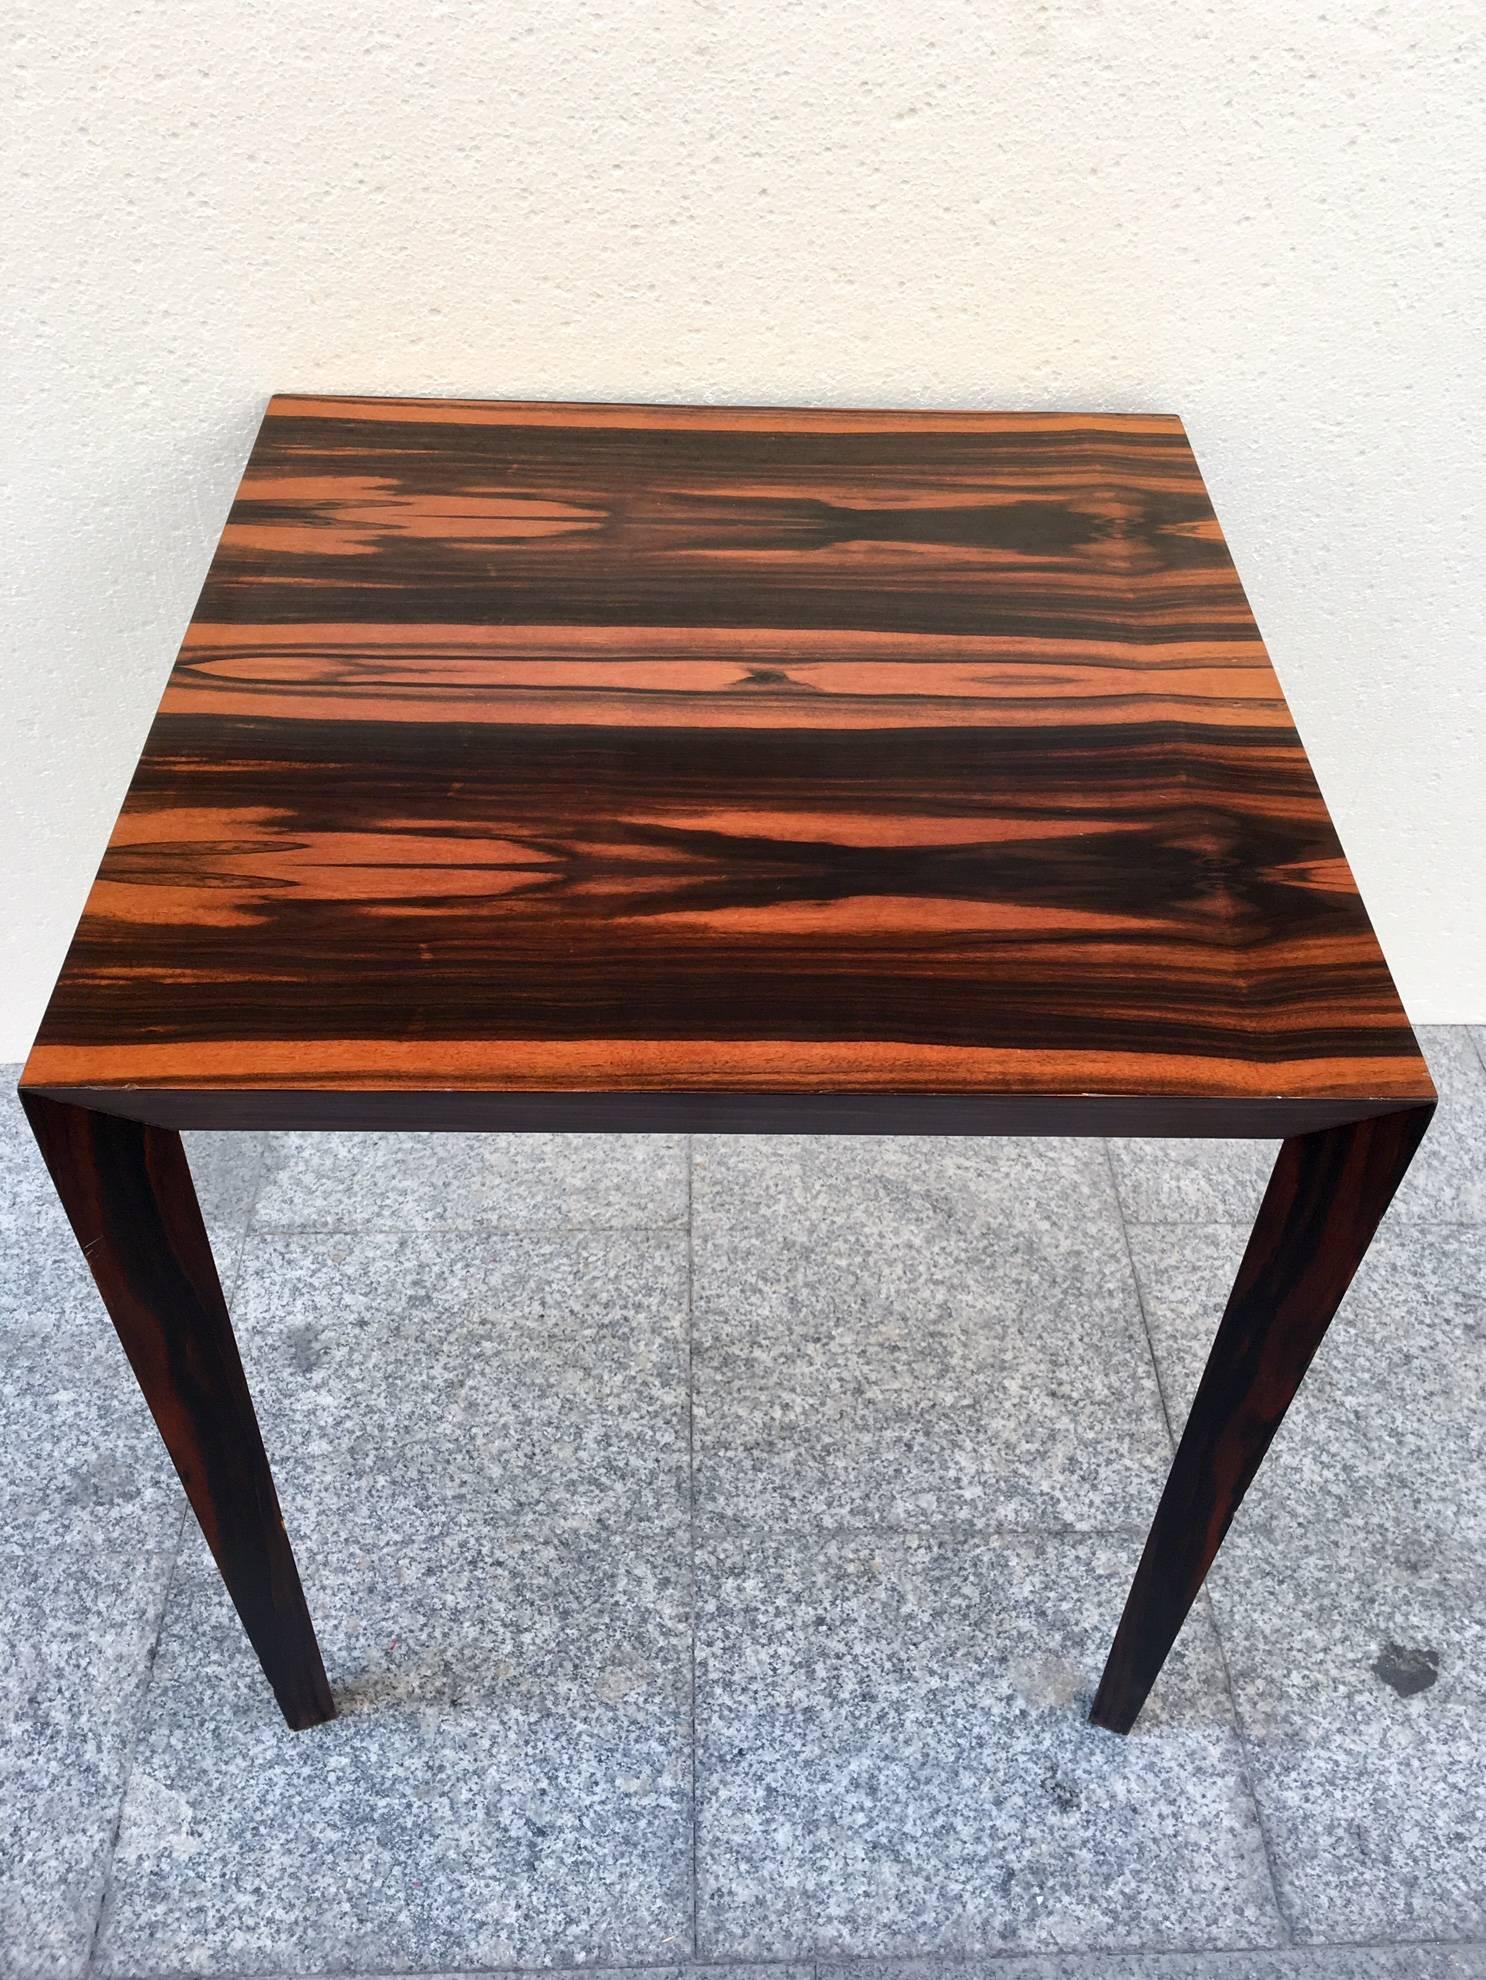 Pair of Deco style side tables of wood covered in Macassar ebony wood.